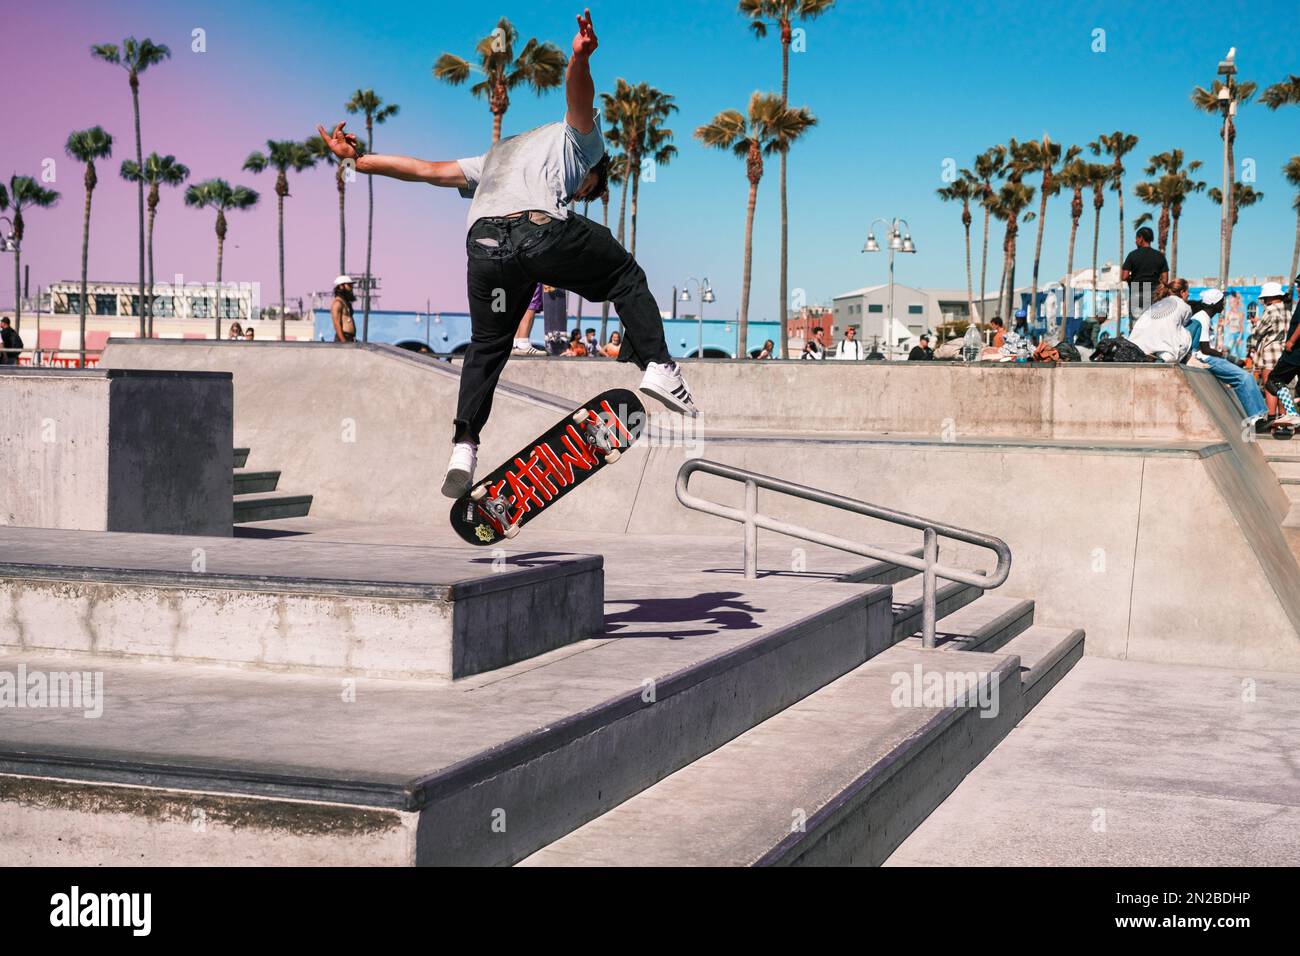 Rad skater flips out at Venice Beach Stock Photo